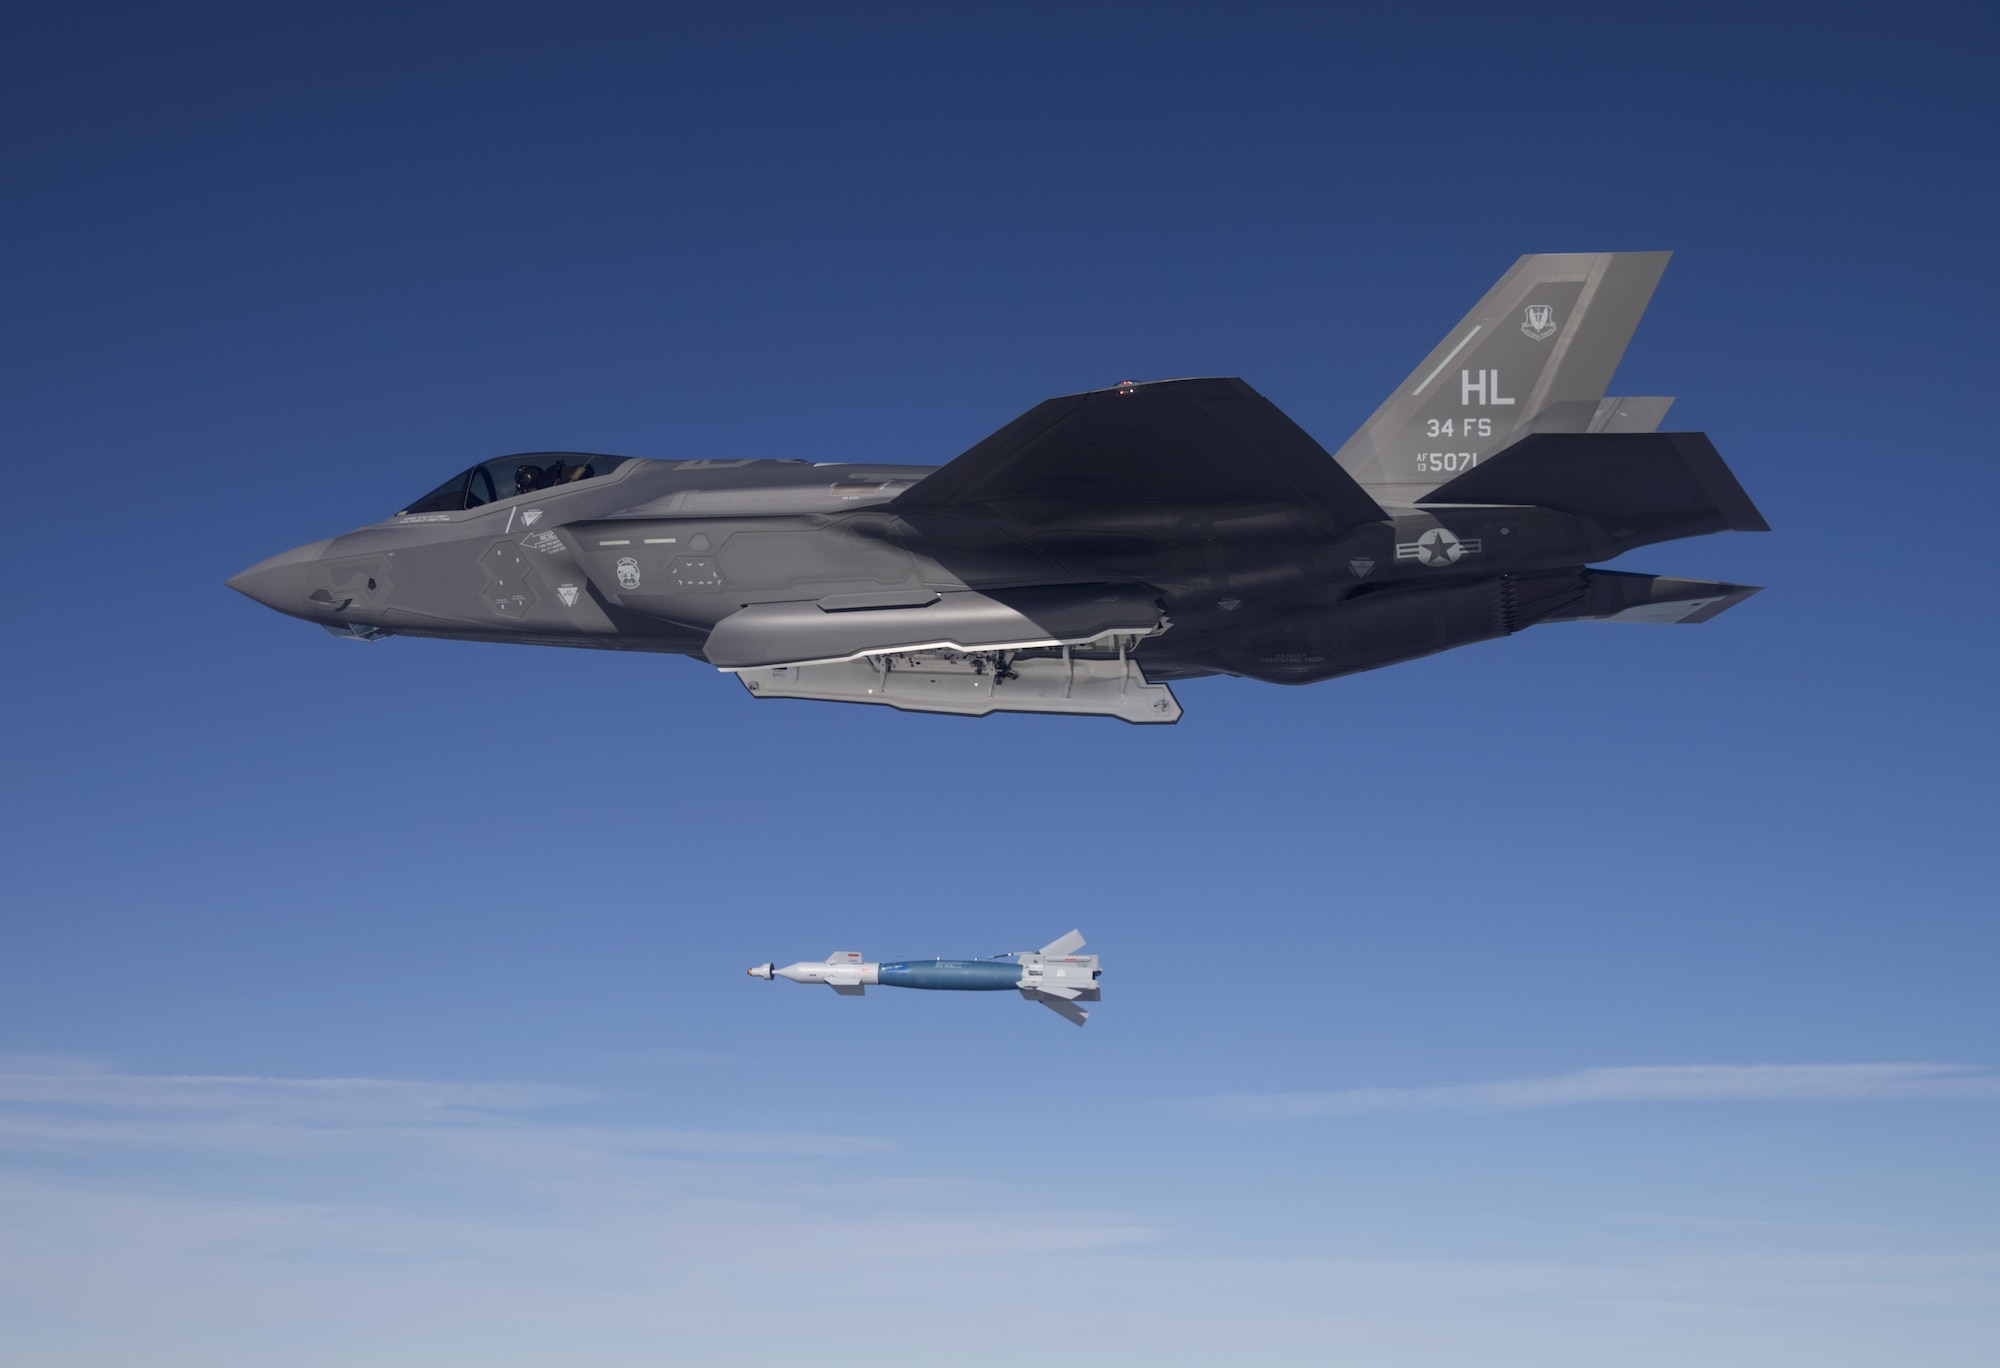 Lt. Col. George Watkins, 34th Fighter Squadron commander, drops a GBU-12 laser-guided bomb from an F-35A Lightning II at the Utah Test and Training Range Feb. 25, 2016. The 34th FS is the Air Force's first combat unit to employ munitions from the F-35A. (U.S. Air Force photo/Jim Haseltine)